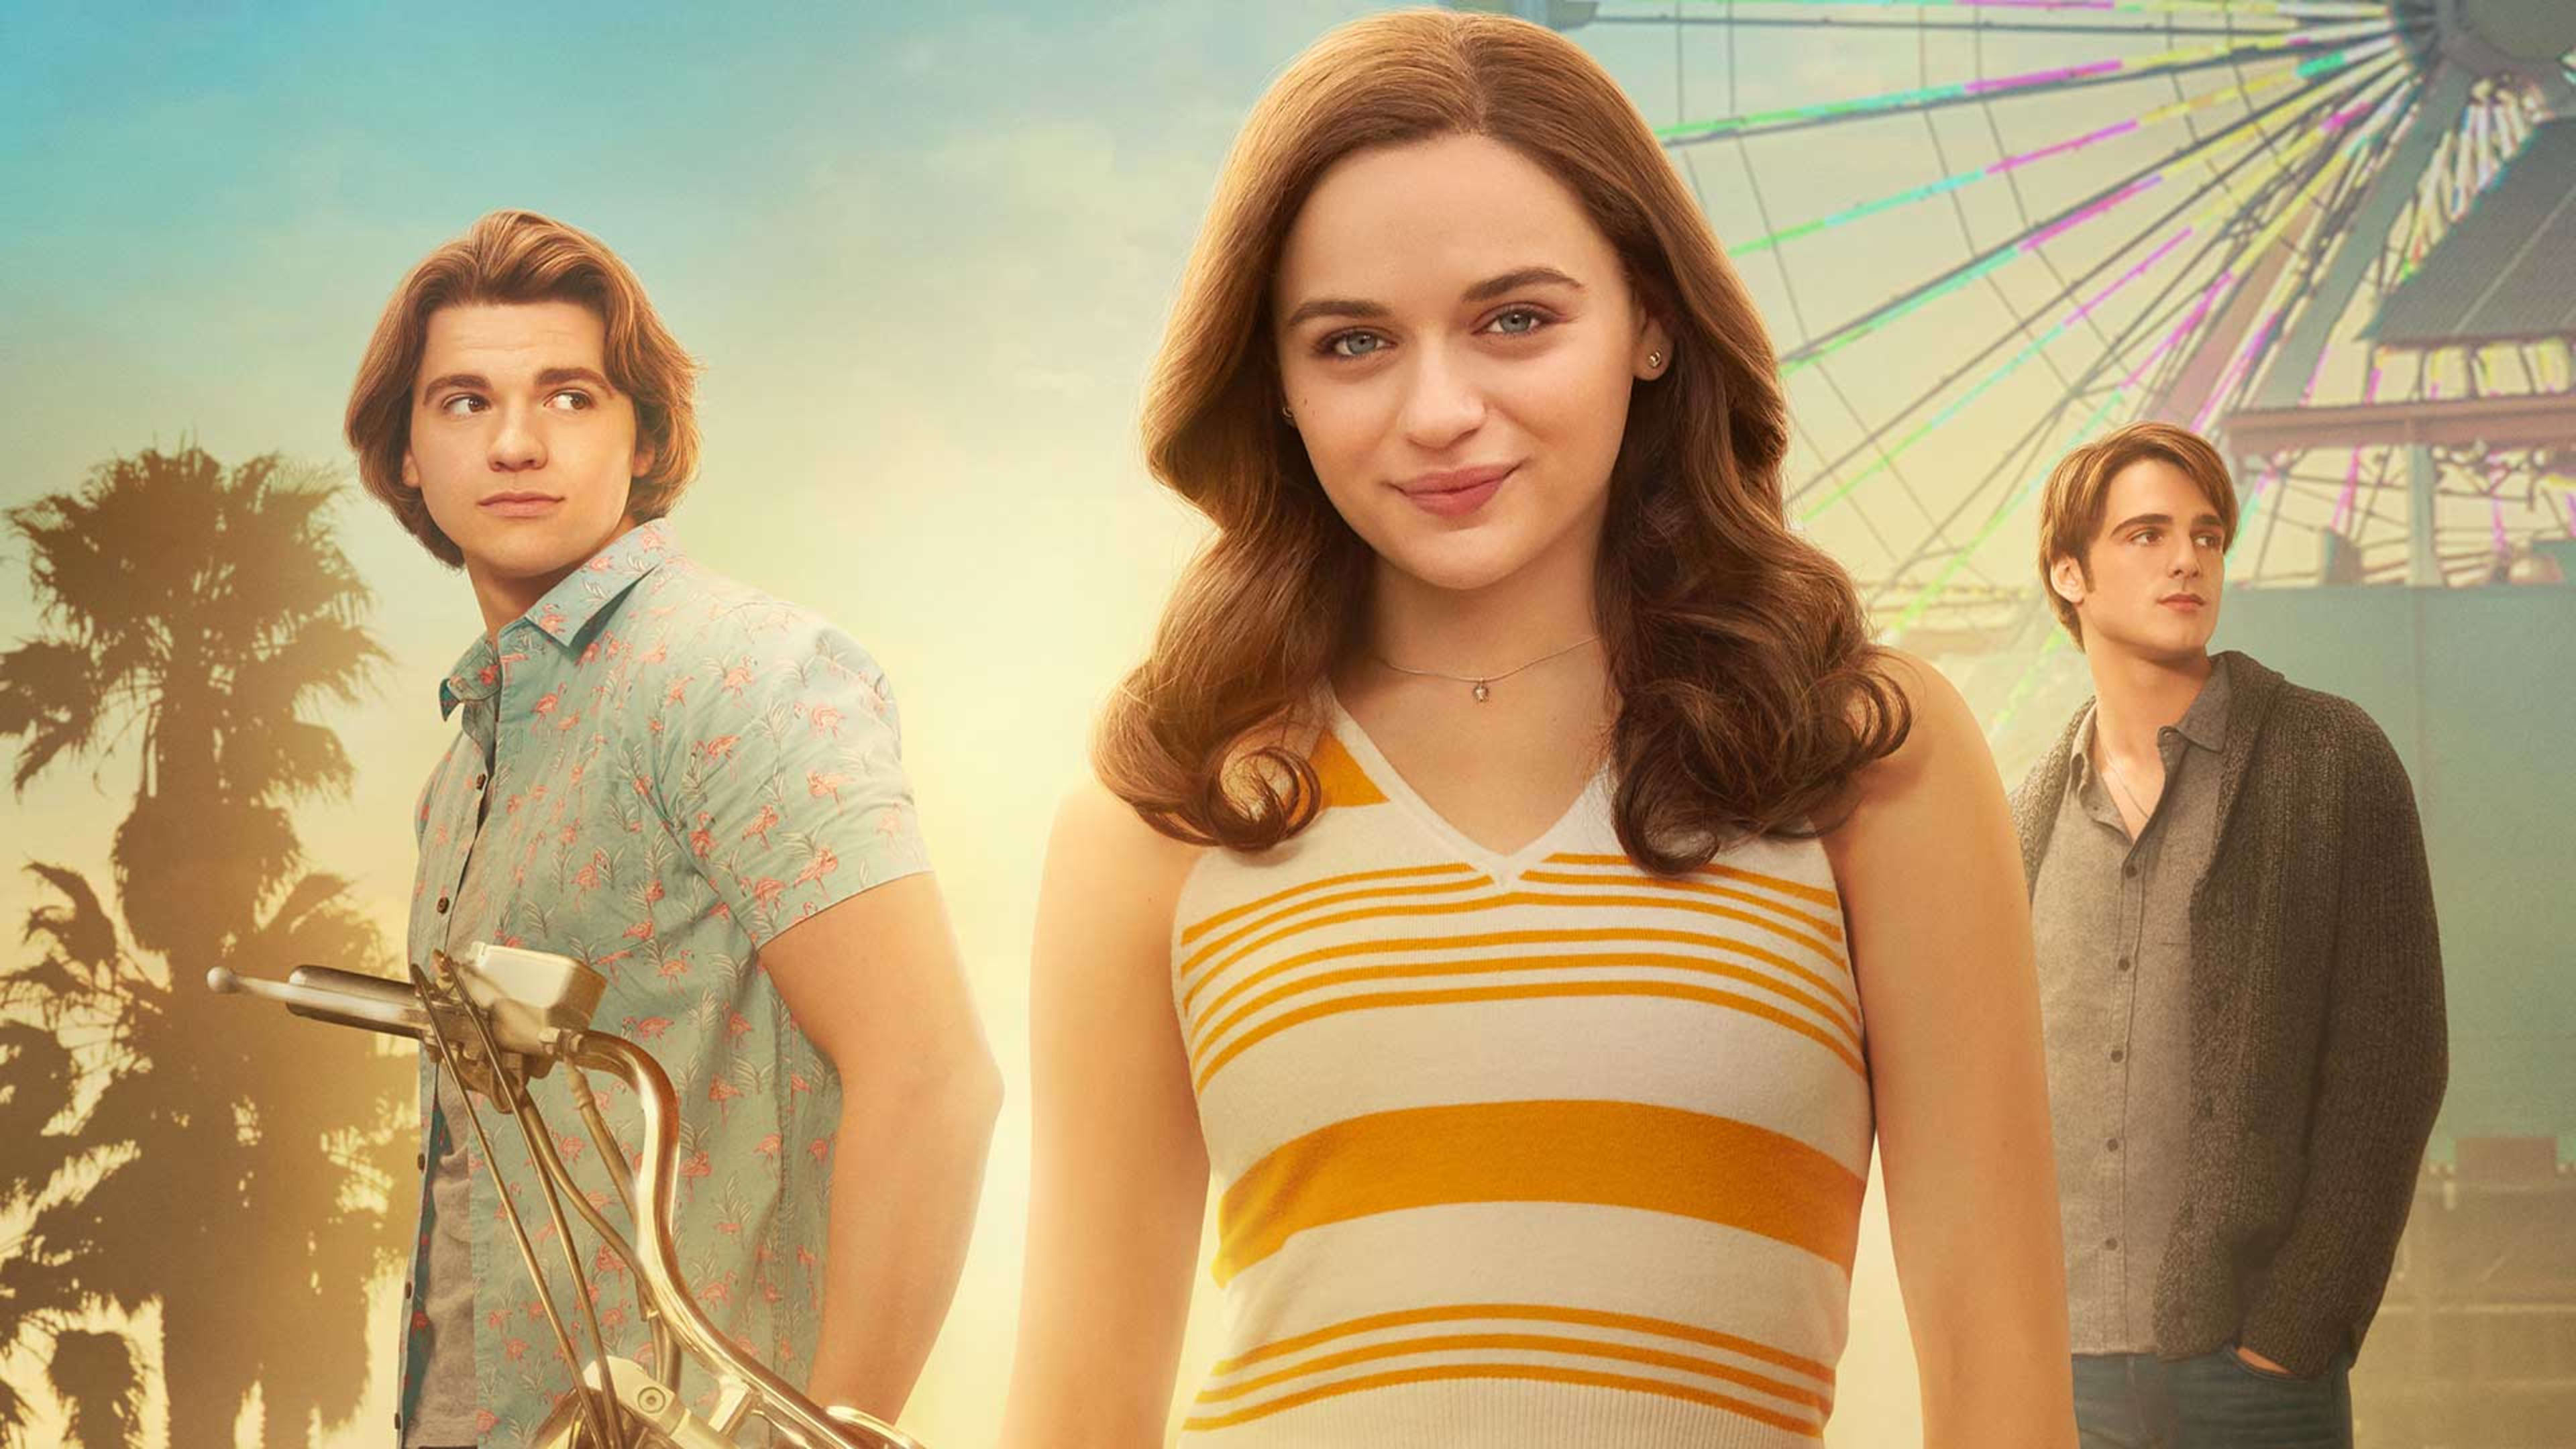 ‘The Kissing Booth’ author breaks down why her novel and Netflix film series became runaway successes